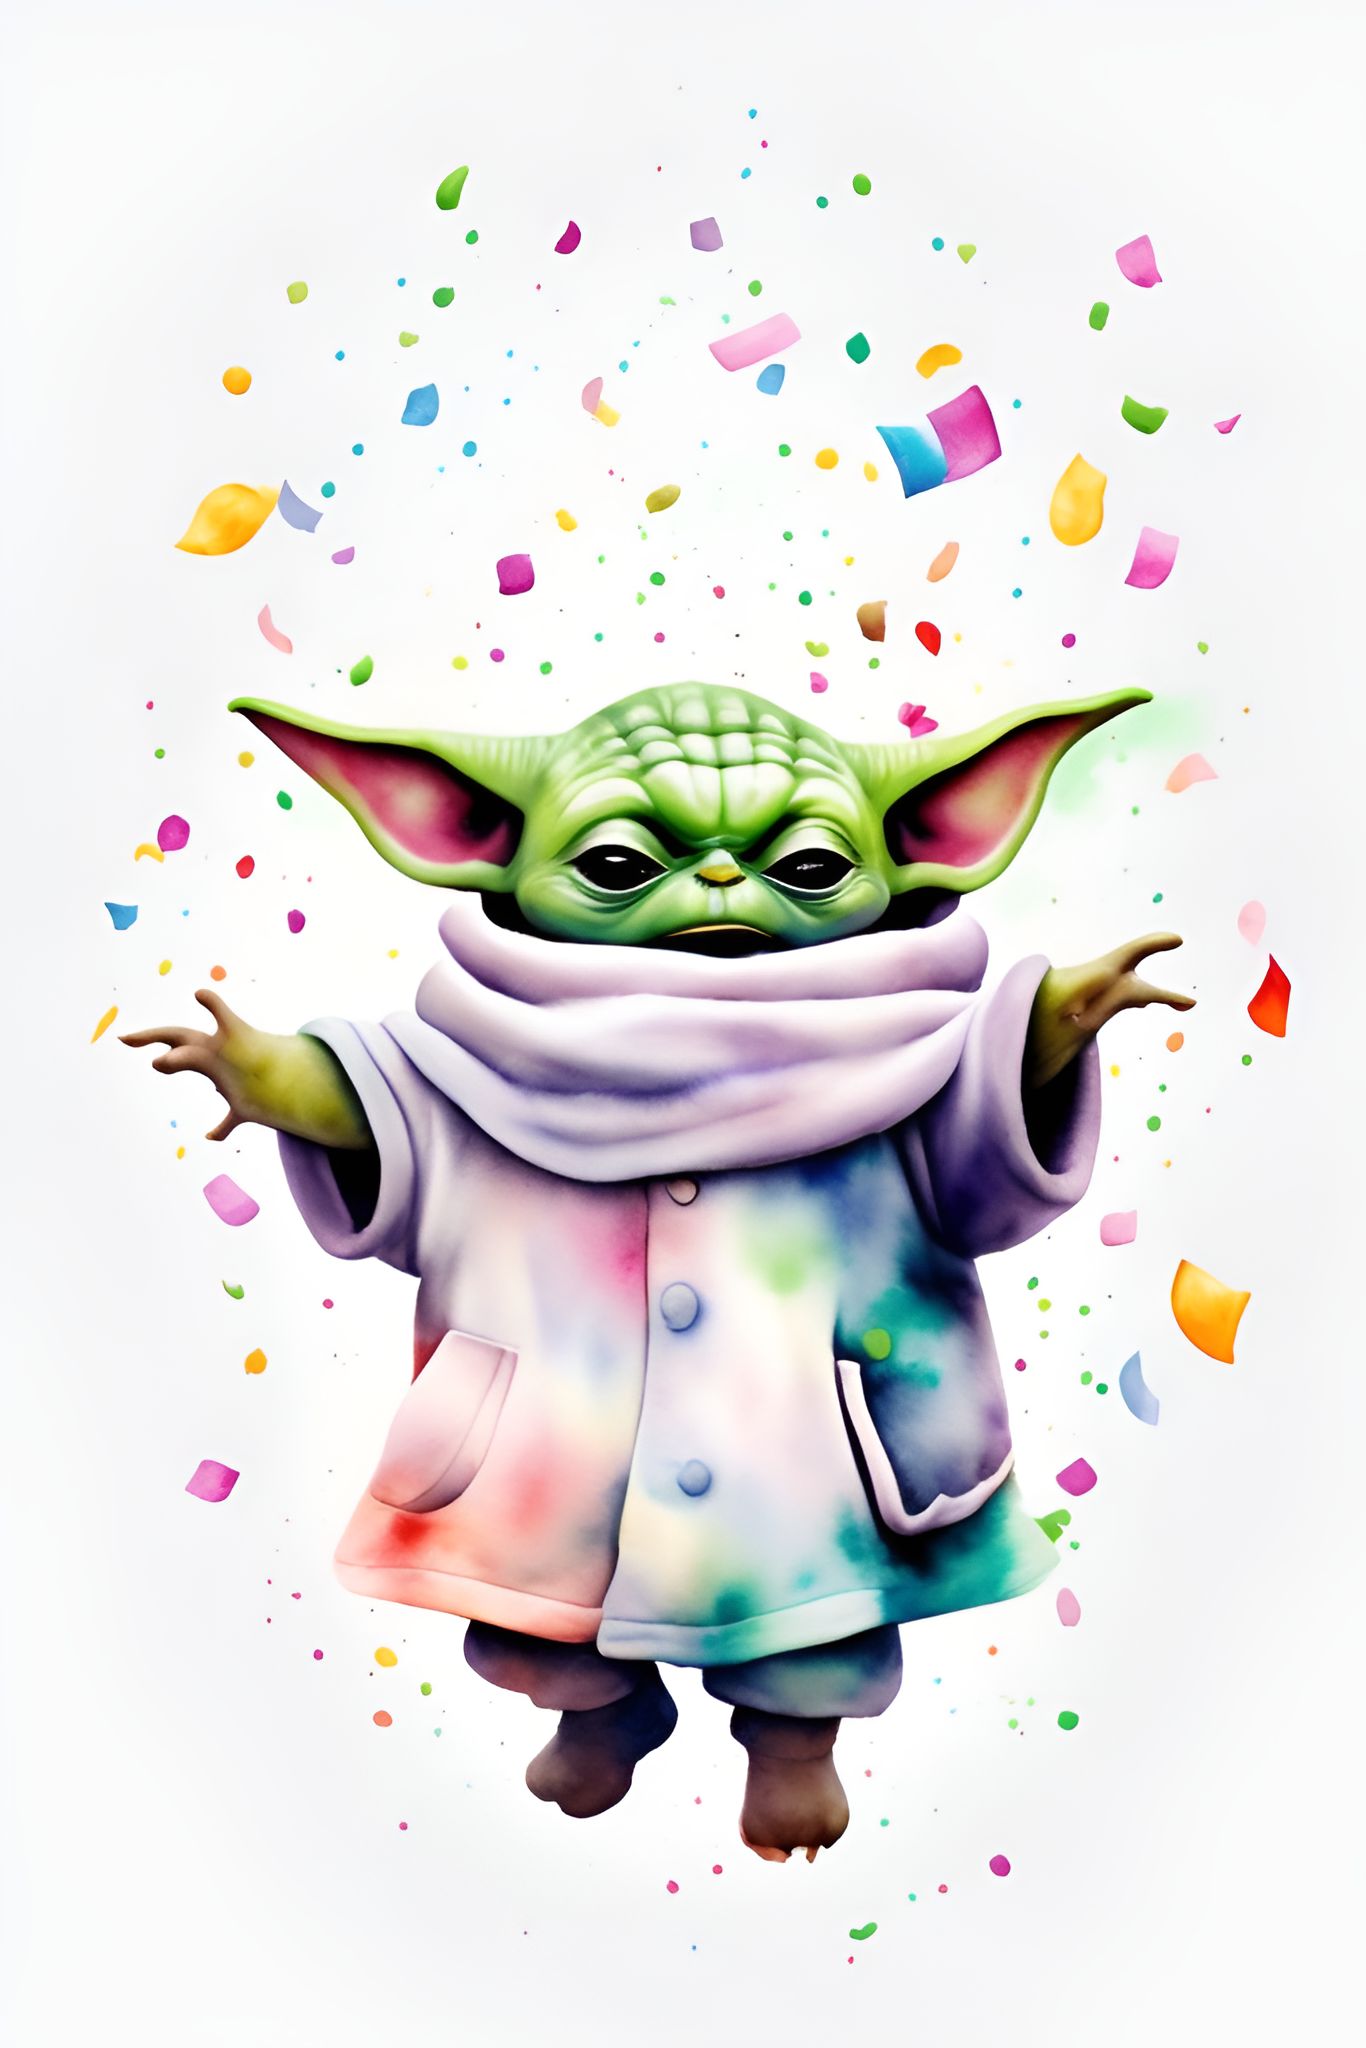 wiry-louse284: watercolor baby yoda with trunk up in air and confetti  flying in air